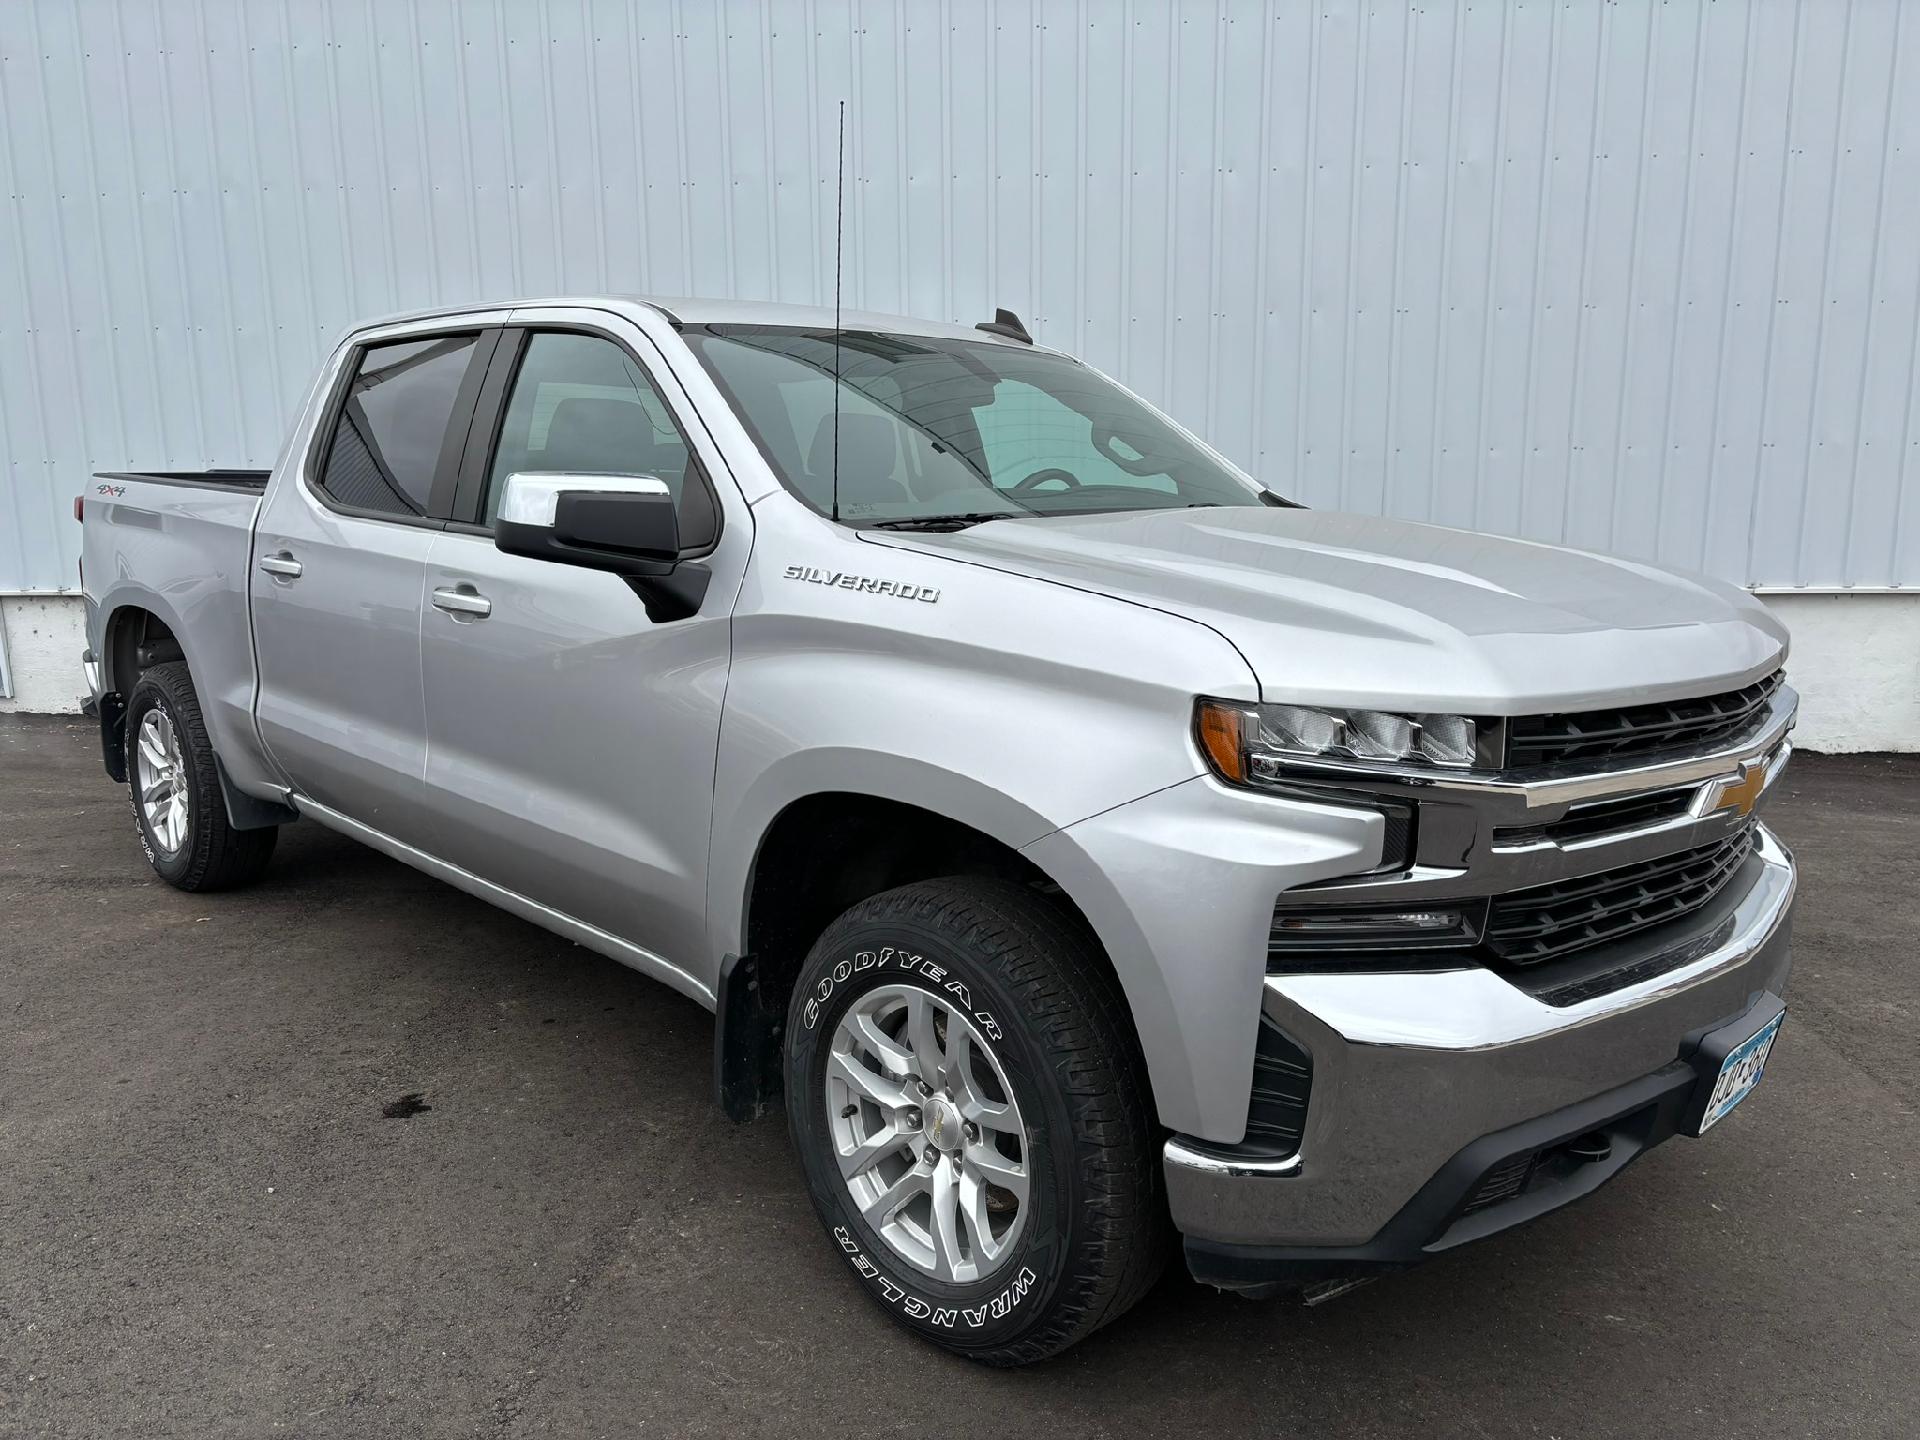 Used 2019 Chevrolet Silverado 1500 LT with VIN 3GCUYDED0KG134695 for sale in Red Lake Falls, Minnesota